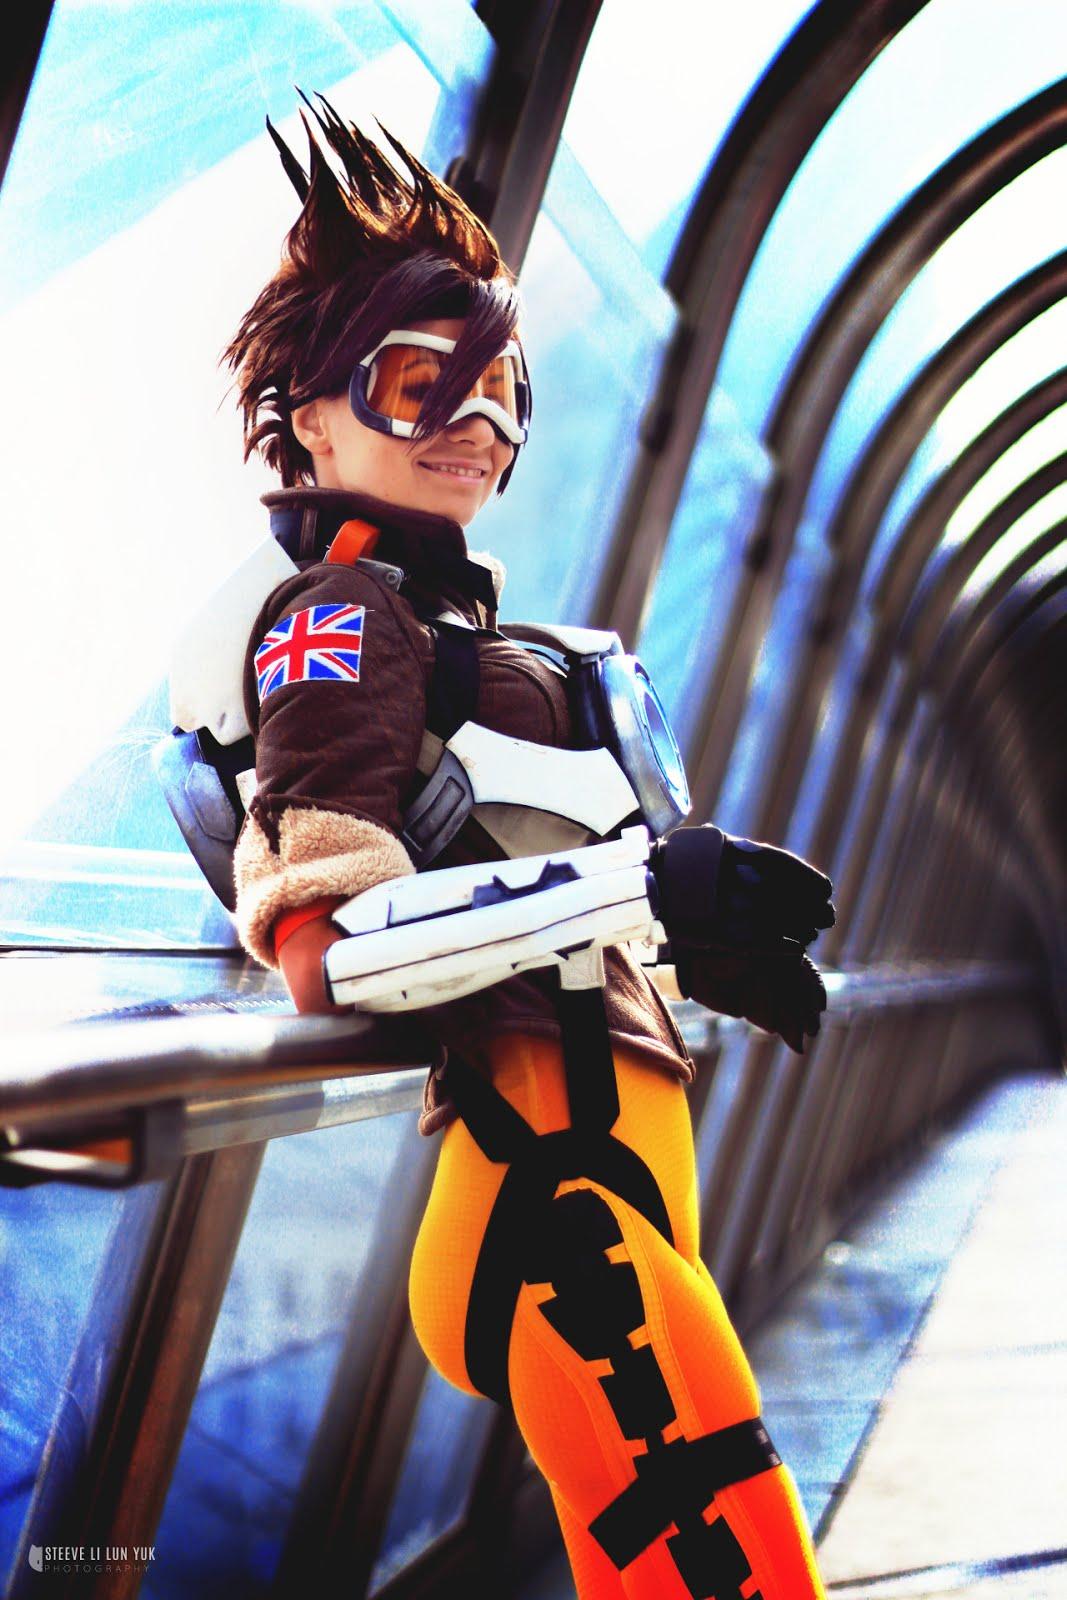 70+ Hot Pictures of Tracer From Overwatch 31